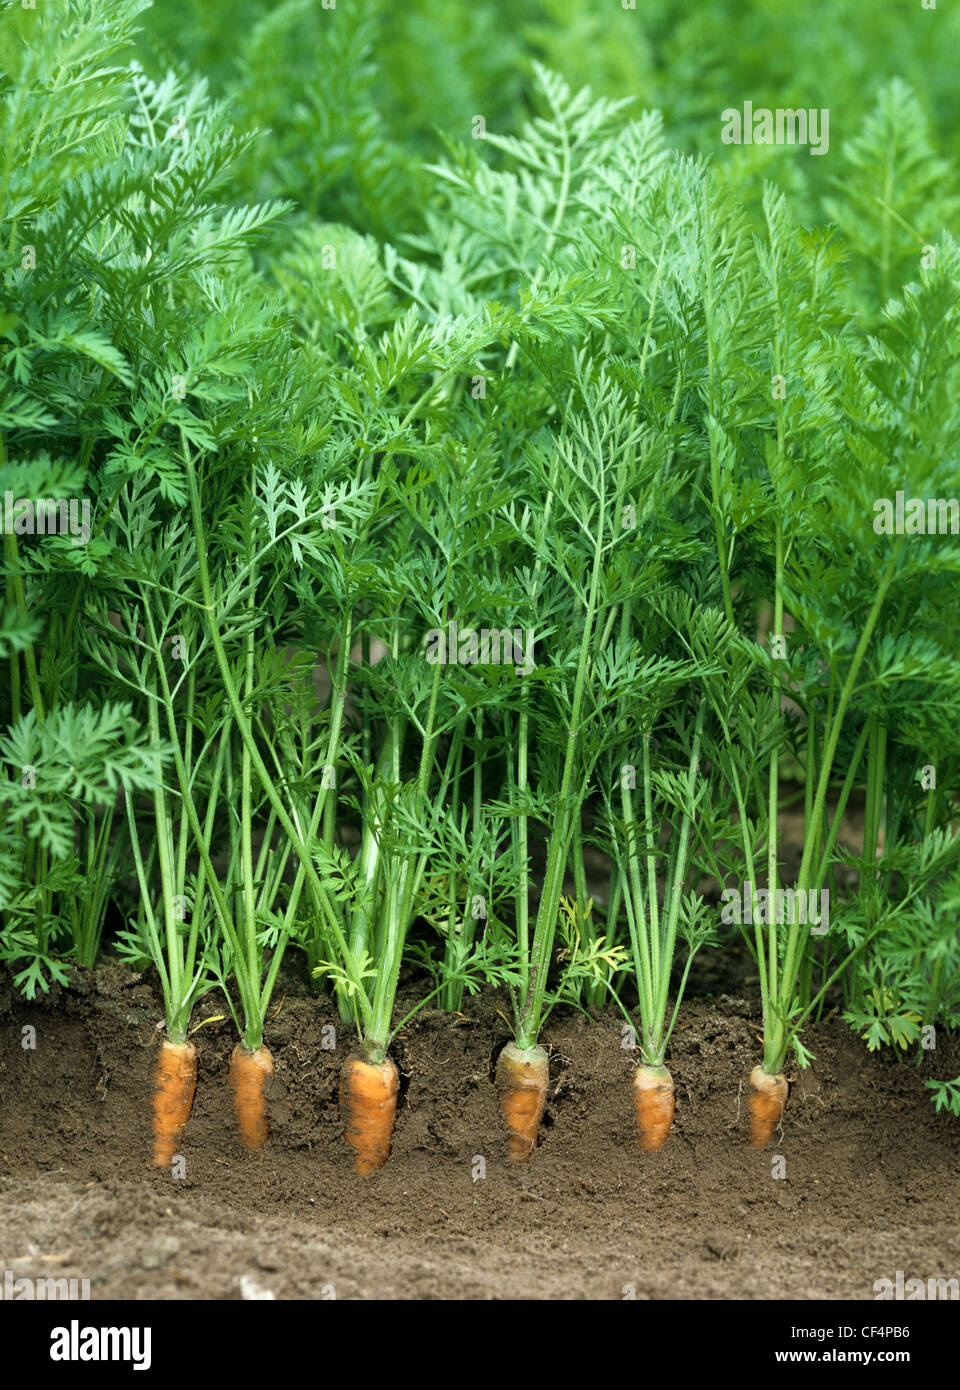 Mature carrots in ground with tap roots exposed Stock Photo